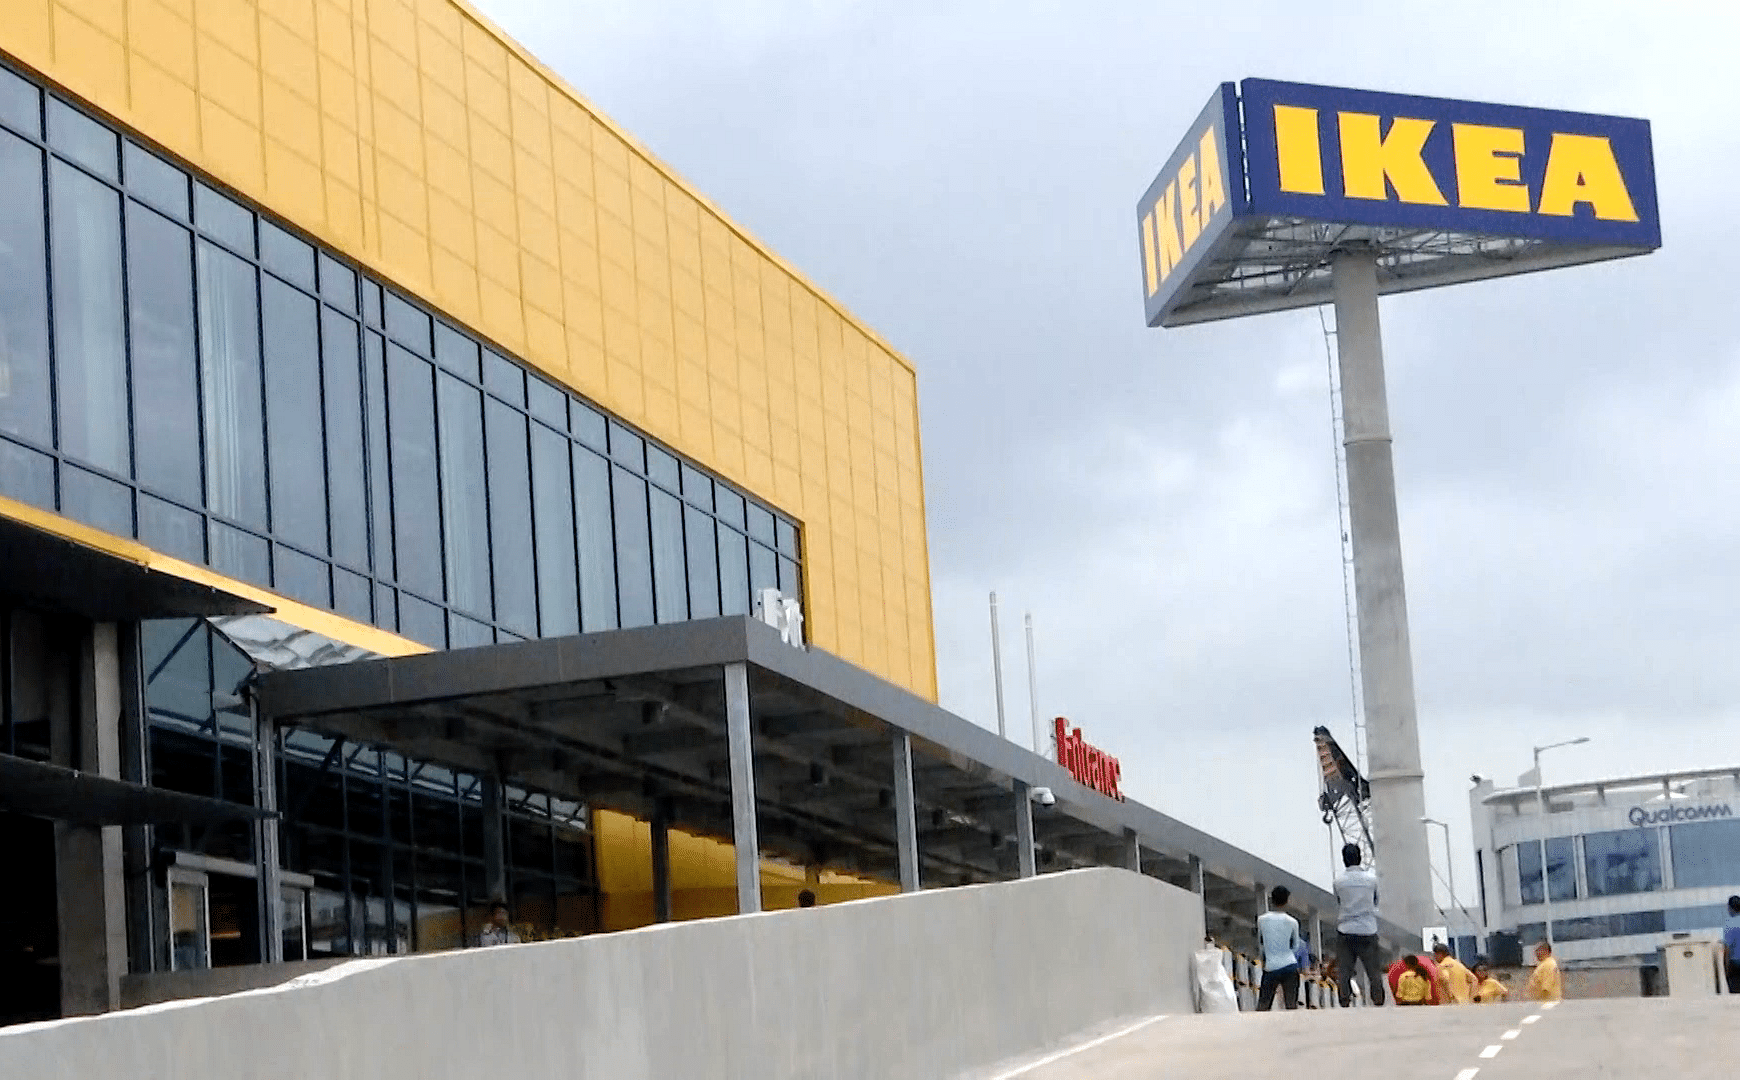 Swedish furniture maker IKEA launches its first Indian outlet in Hyderabad on 9 August.